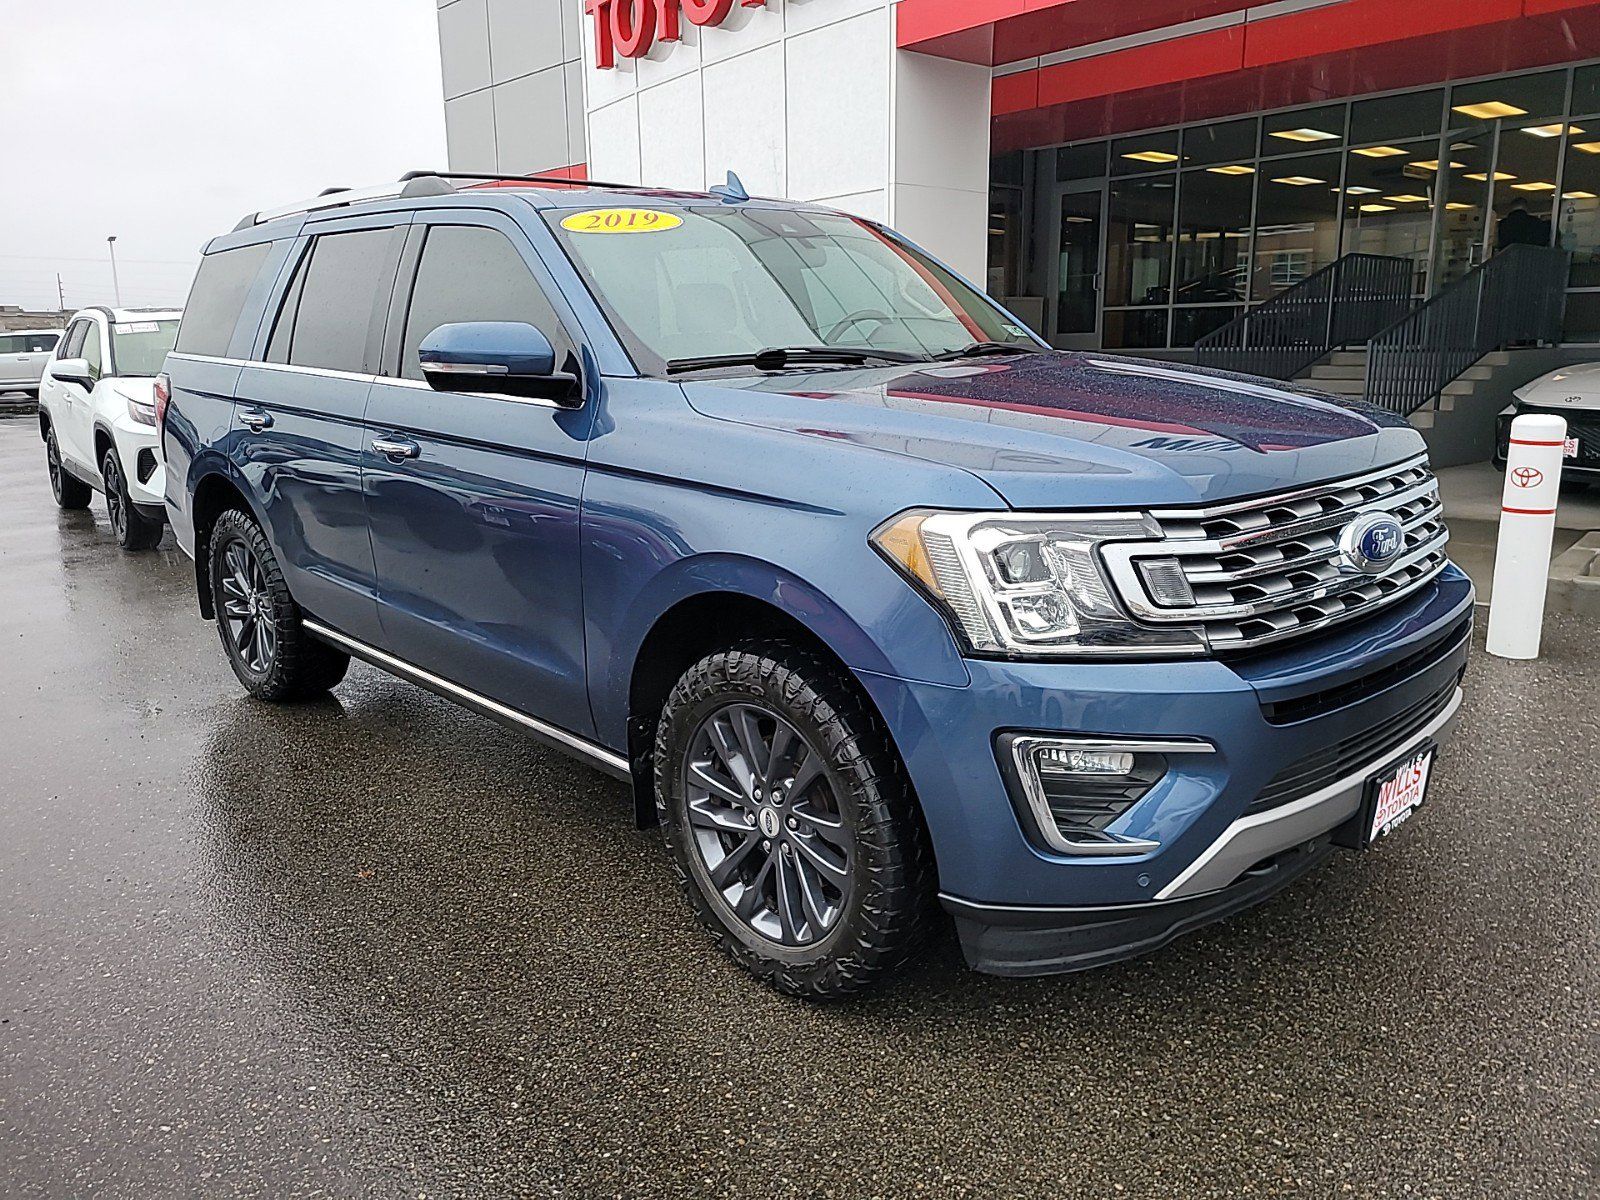 2019 - Ford - Expedition - $28,788